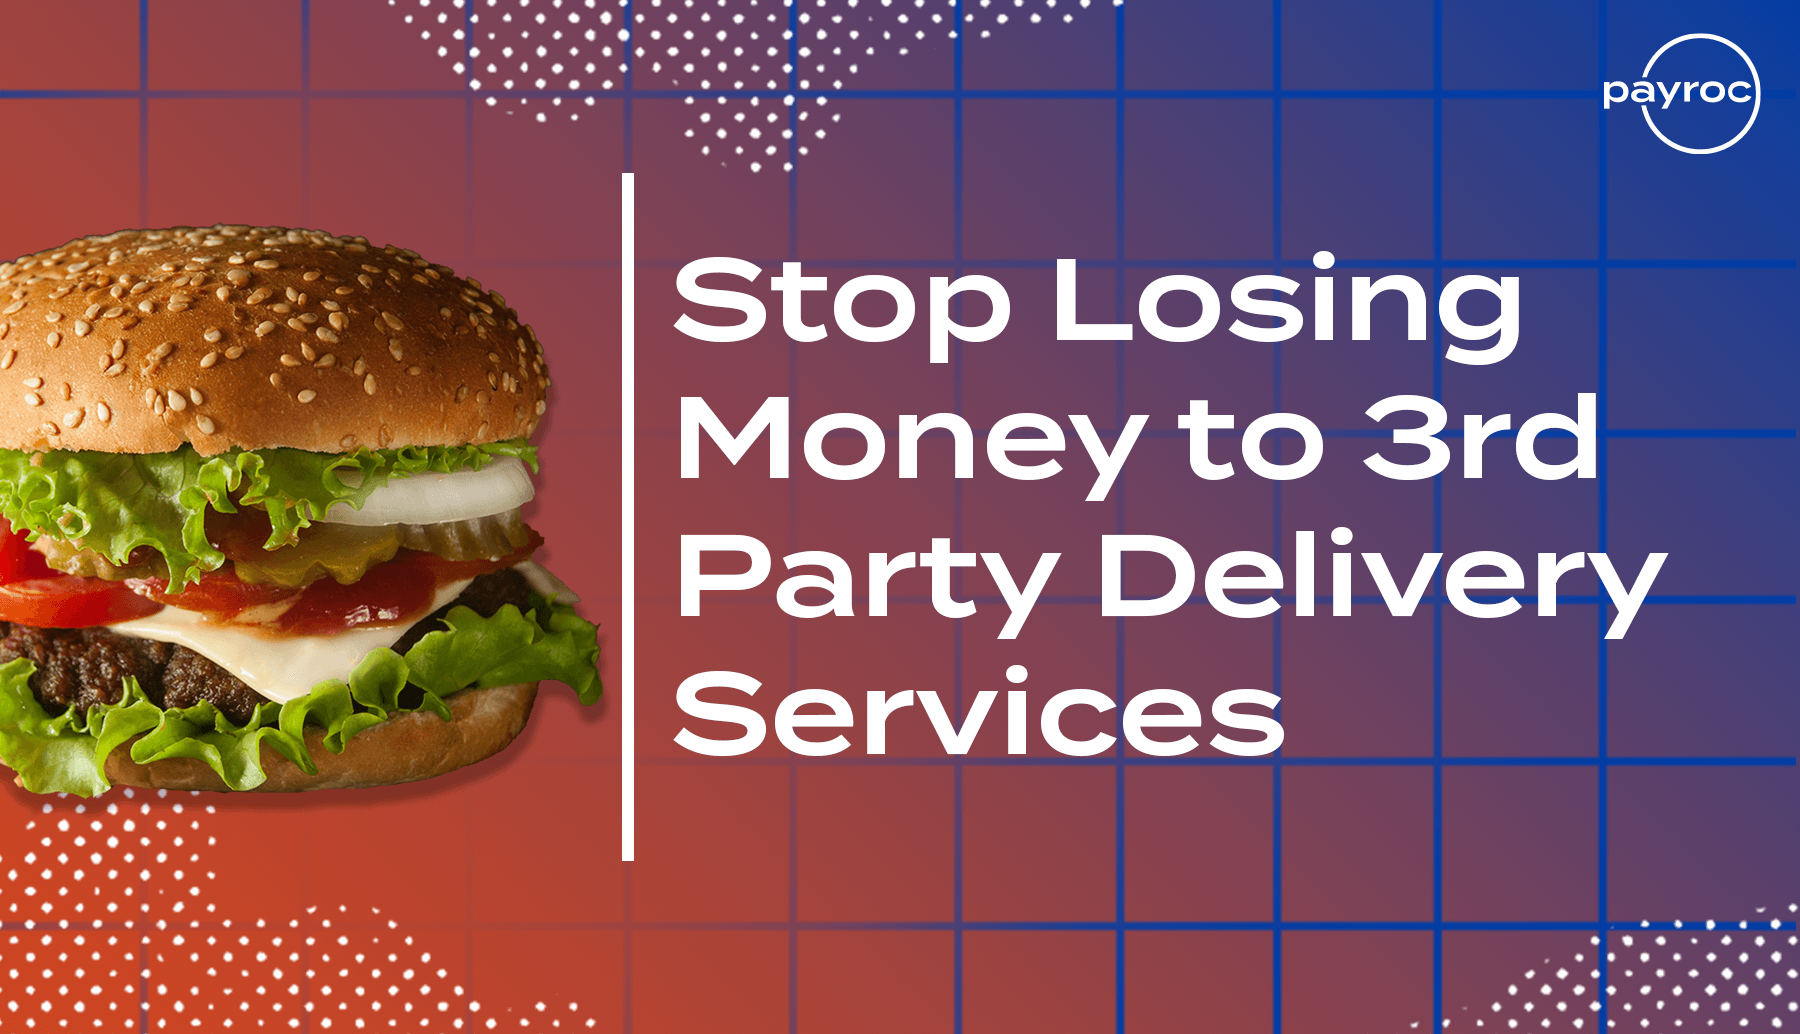 Stop Losing Money to Third-Party Delivery Services